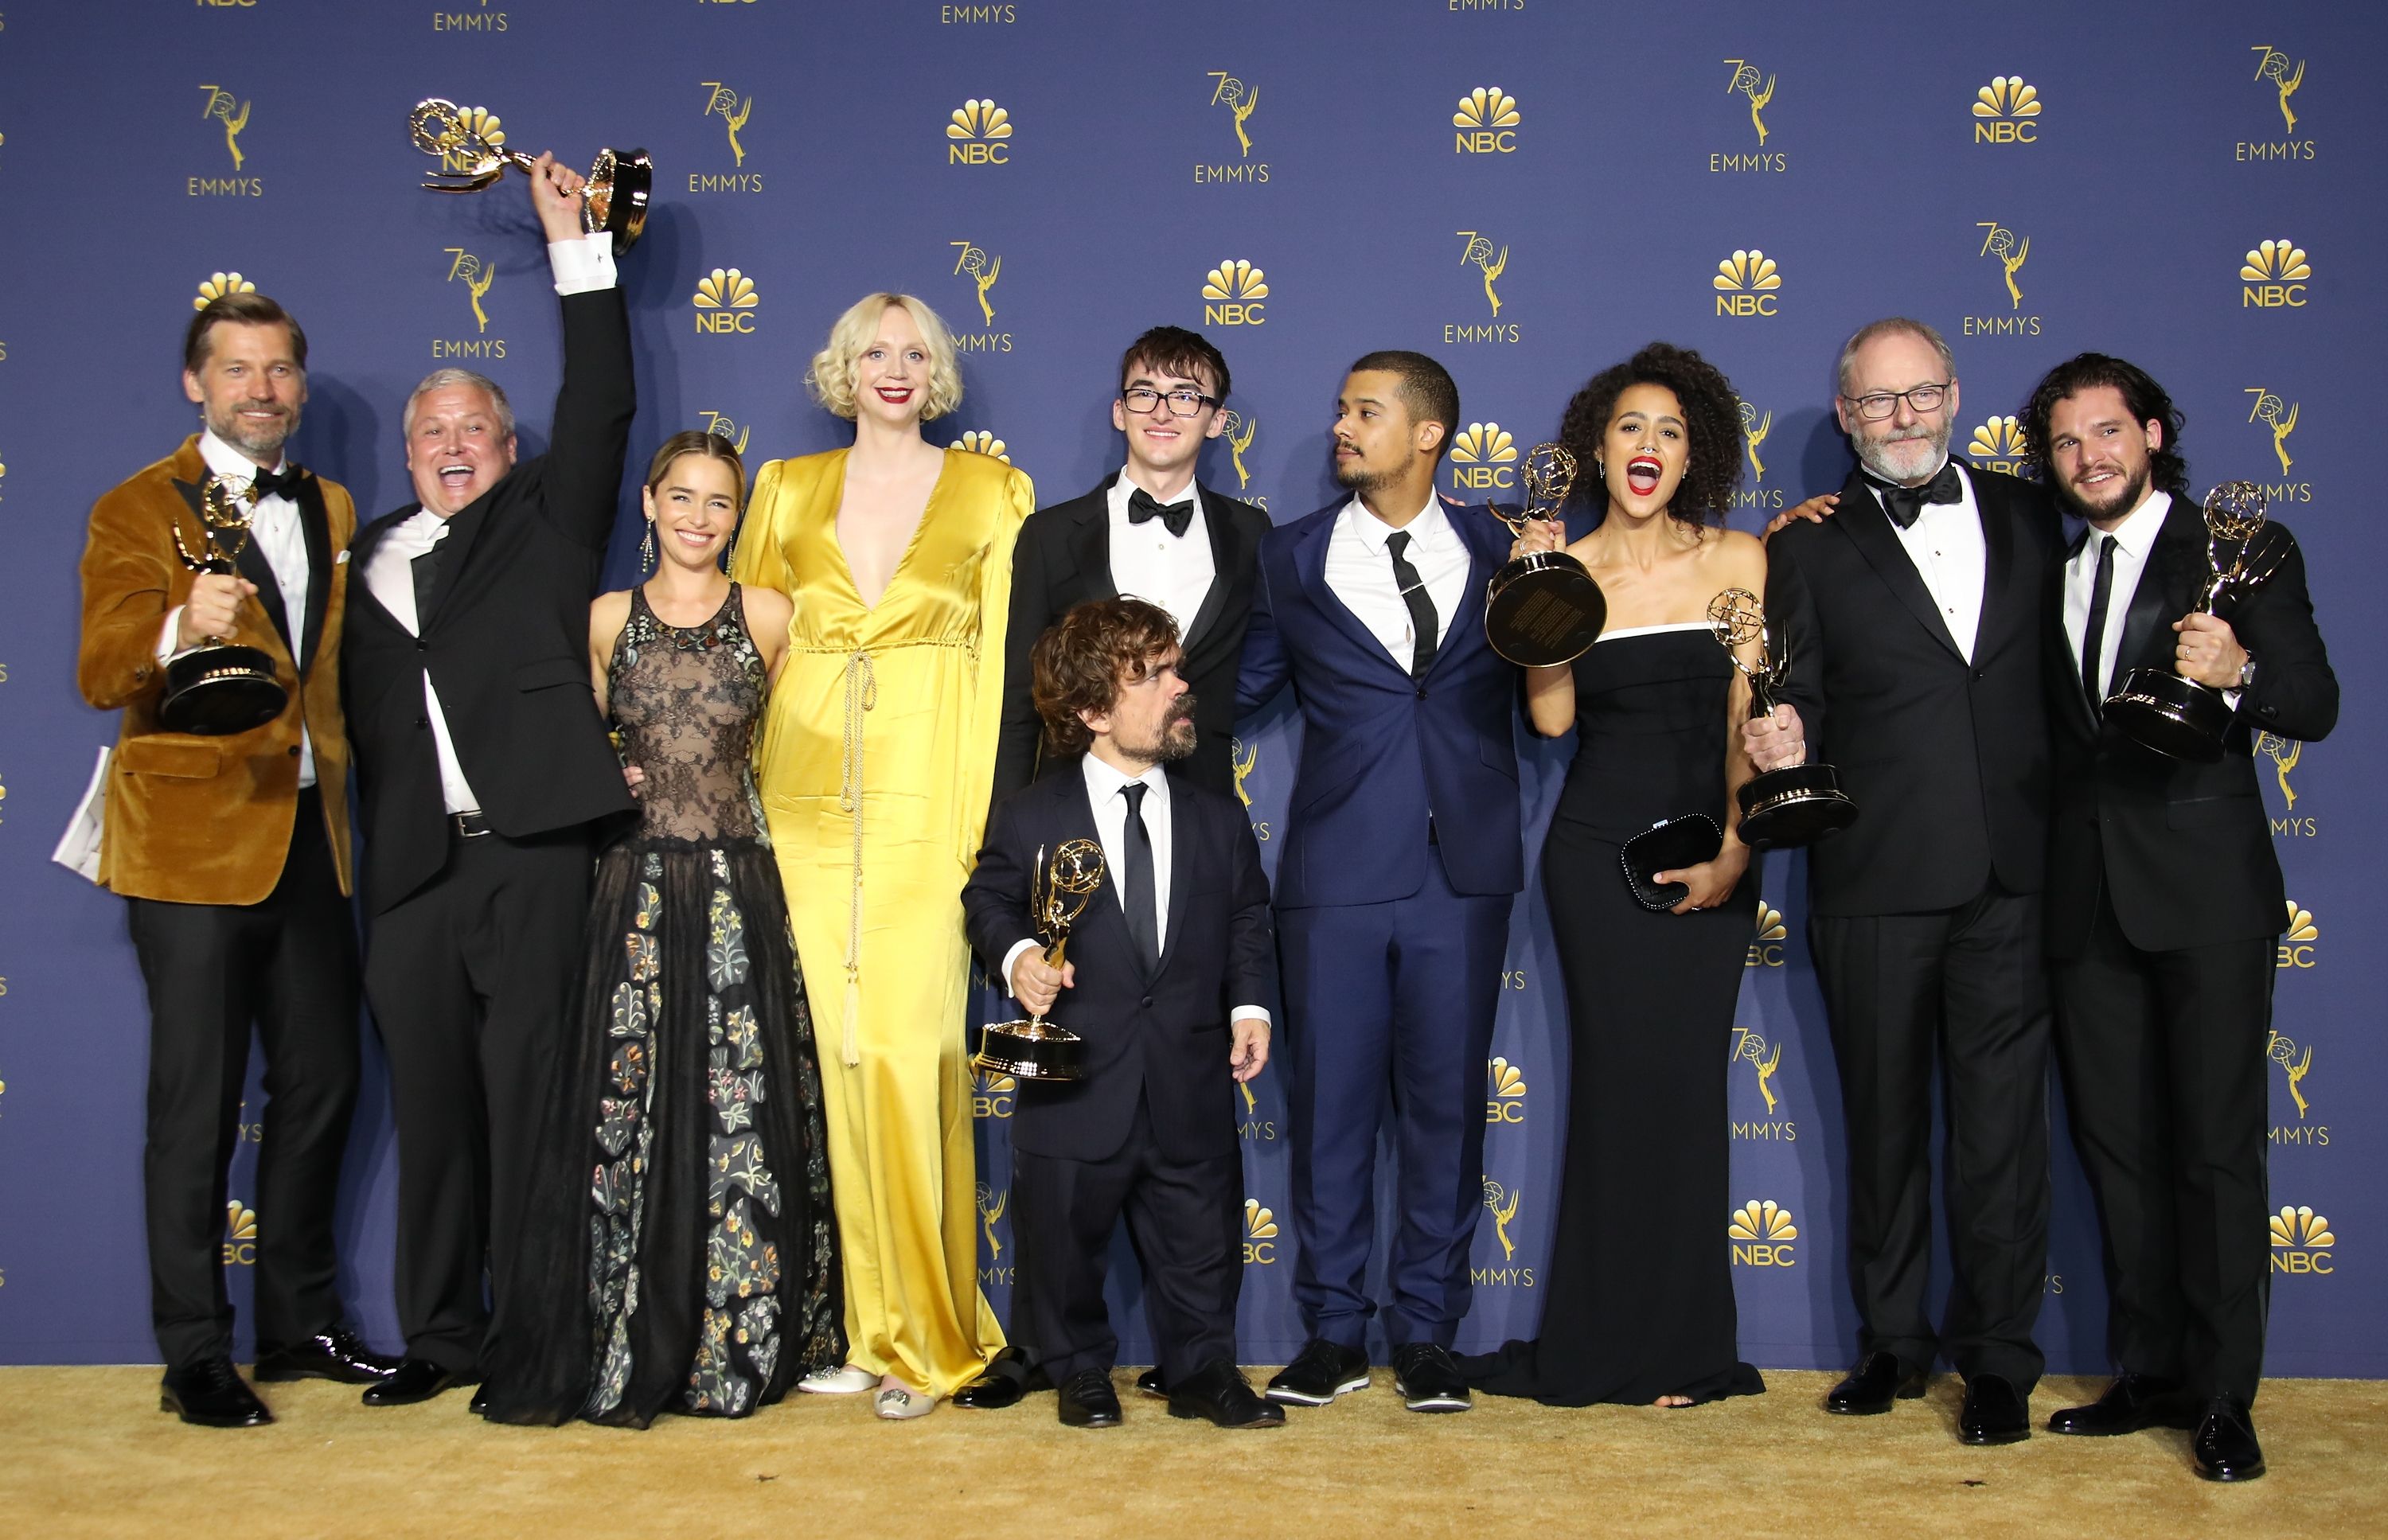 Cast And Crew Of Game Of Thrones Pose With Their News Photo 1035684038 1558042978 